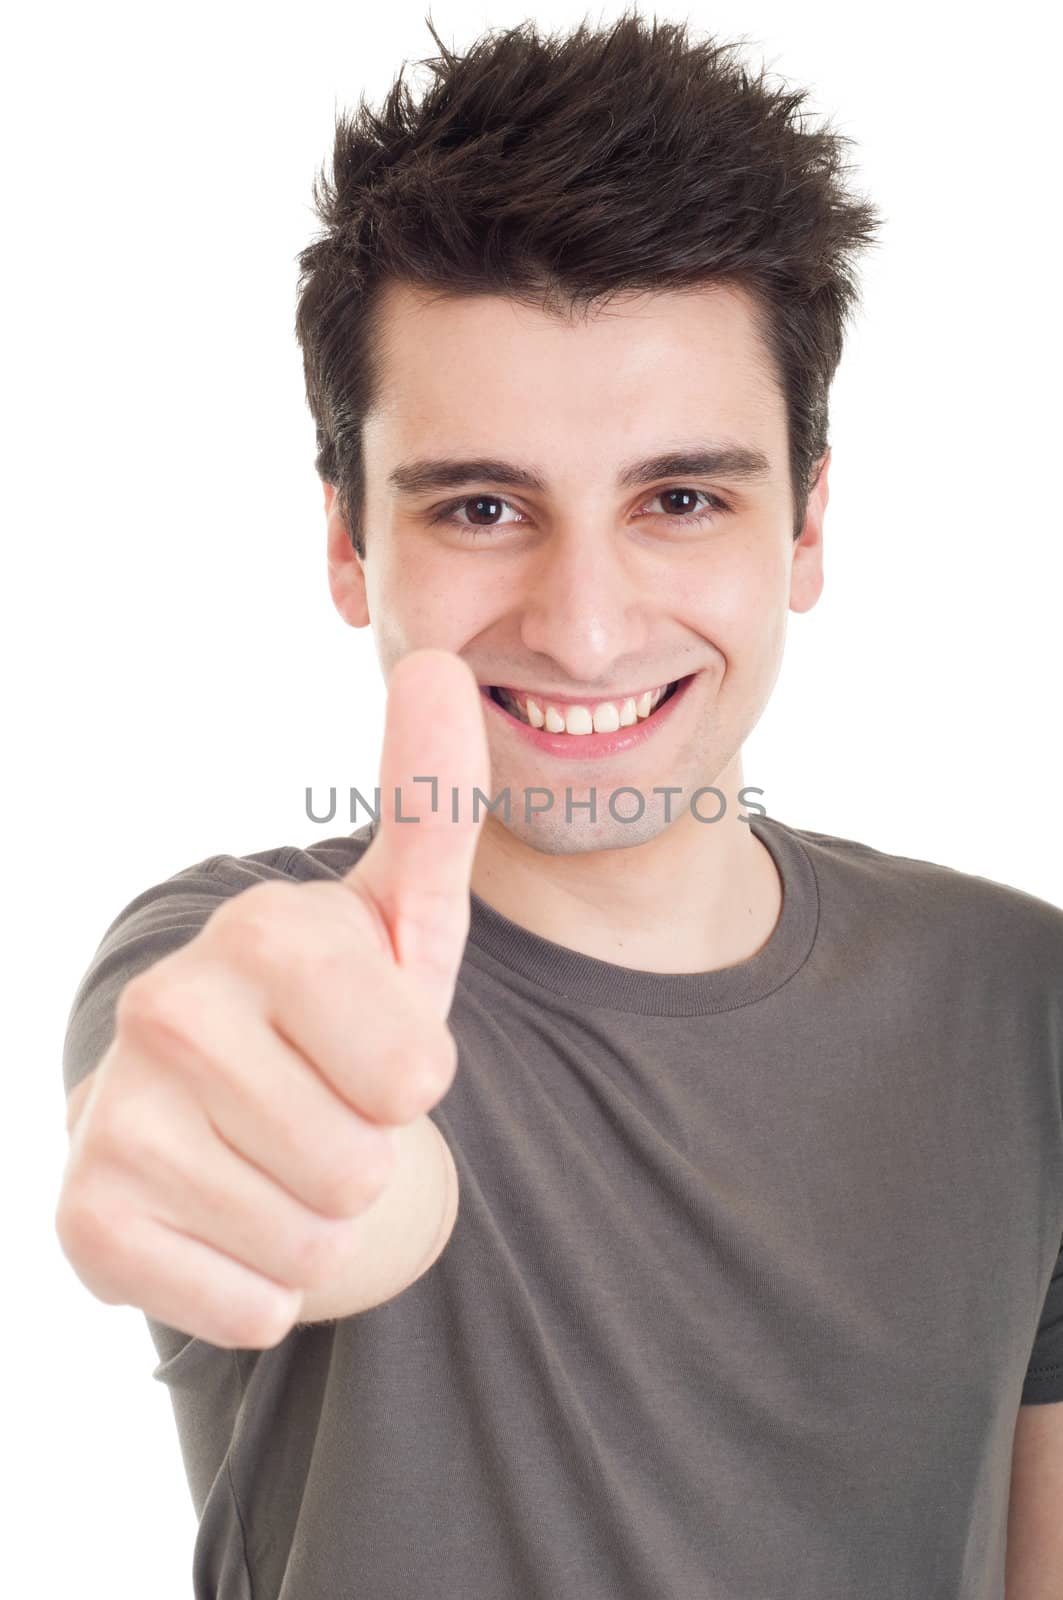 smiling young man with thumbs up on an isolated white background